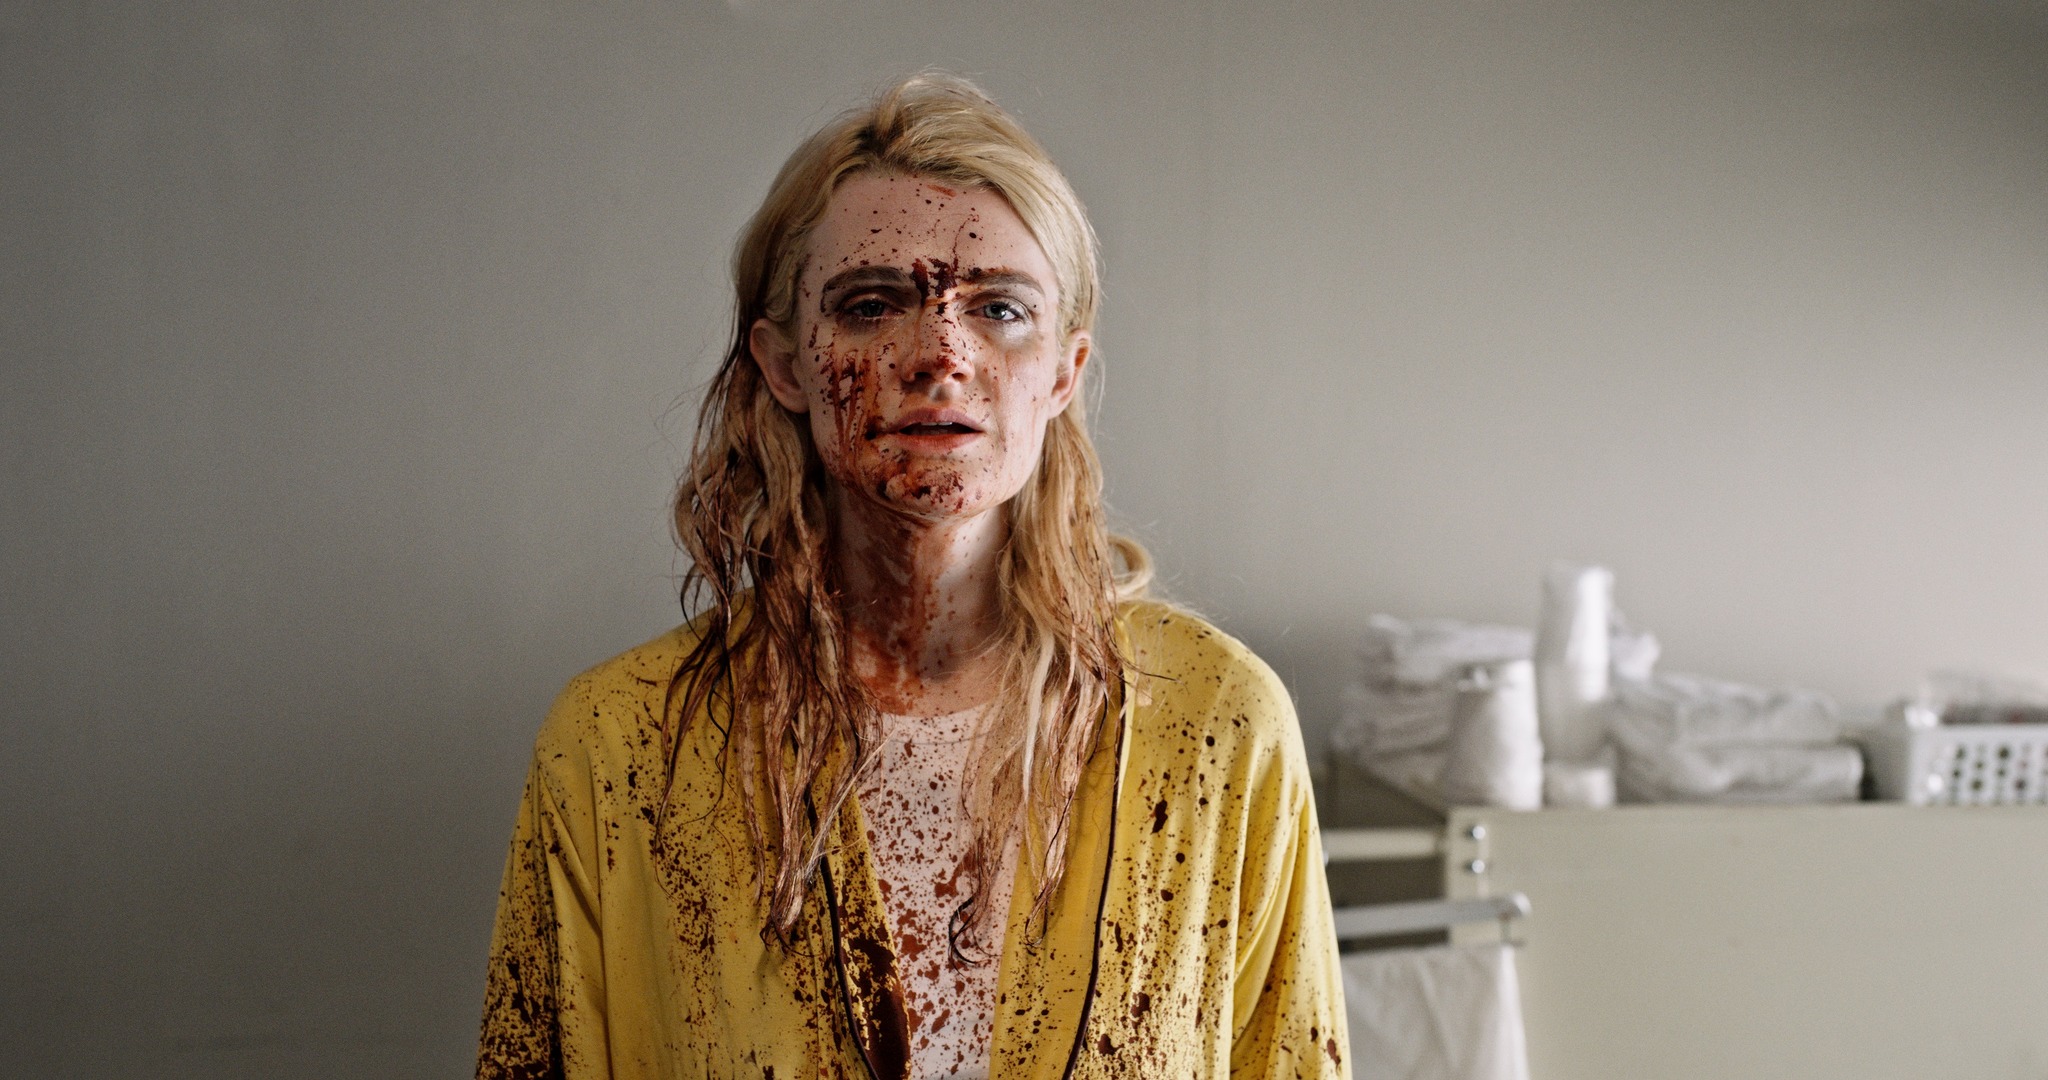 Gayle Rankin covered in blood in the movie Bad Things.